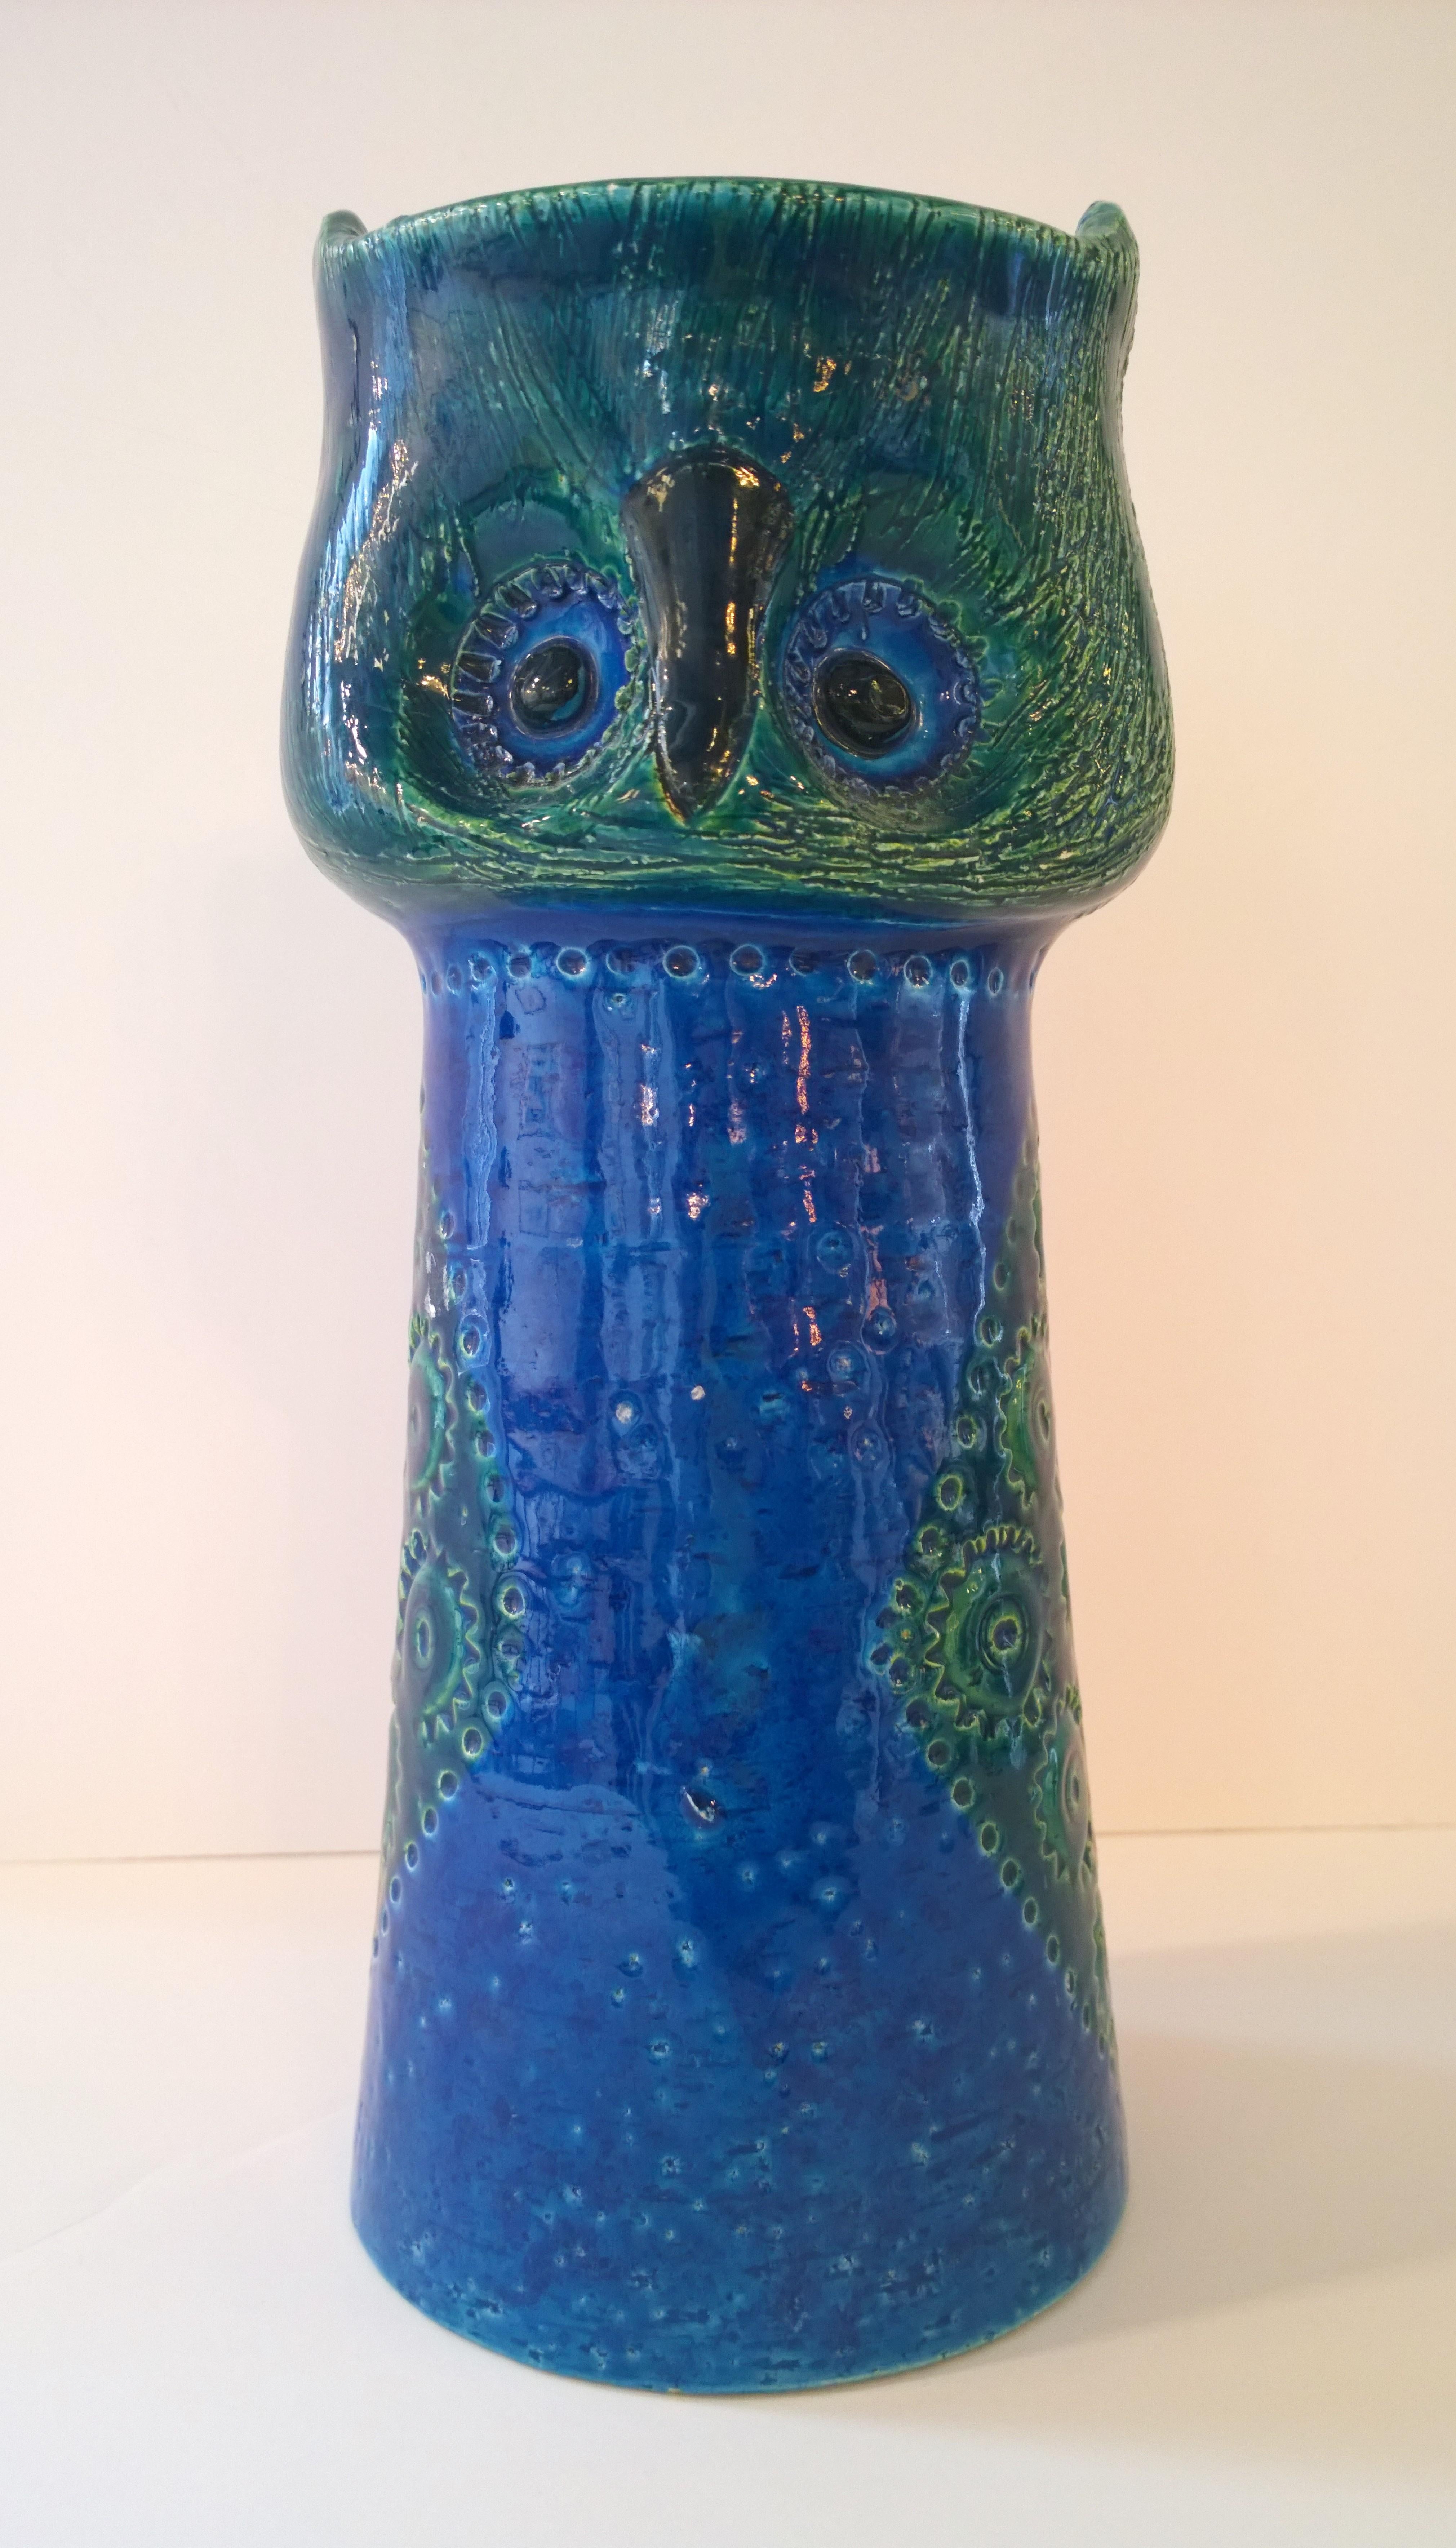 Offered is a Mid-Century Modern Italian figural owl head on glazed ceramic body pottery vase by Bitossi for Raymor. Typical blue and green glaze on impressed clay form. Illegible marking on bottom of vase. This piece is quite representative of the